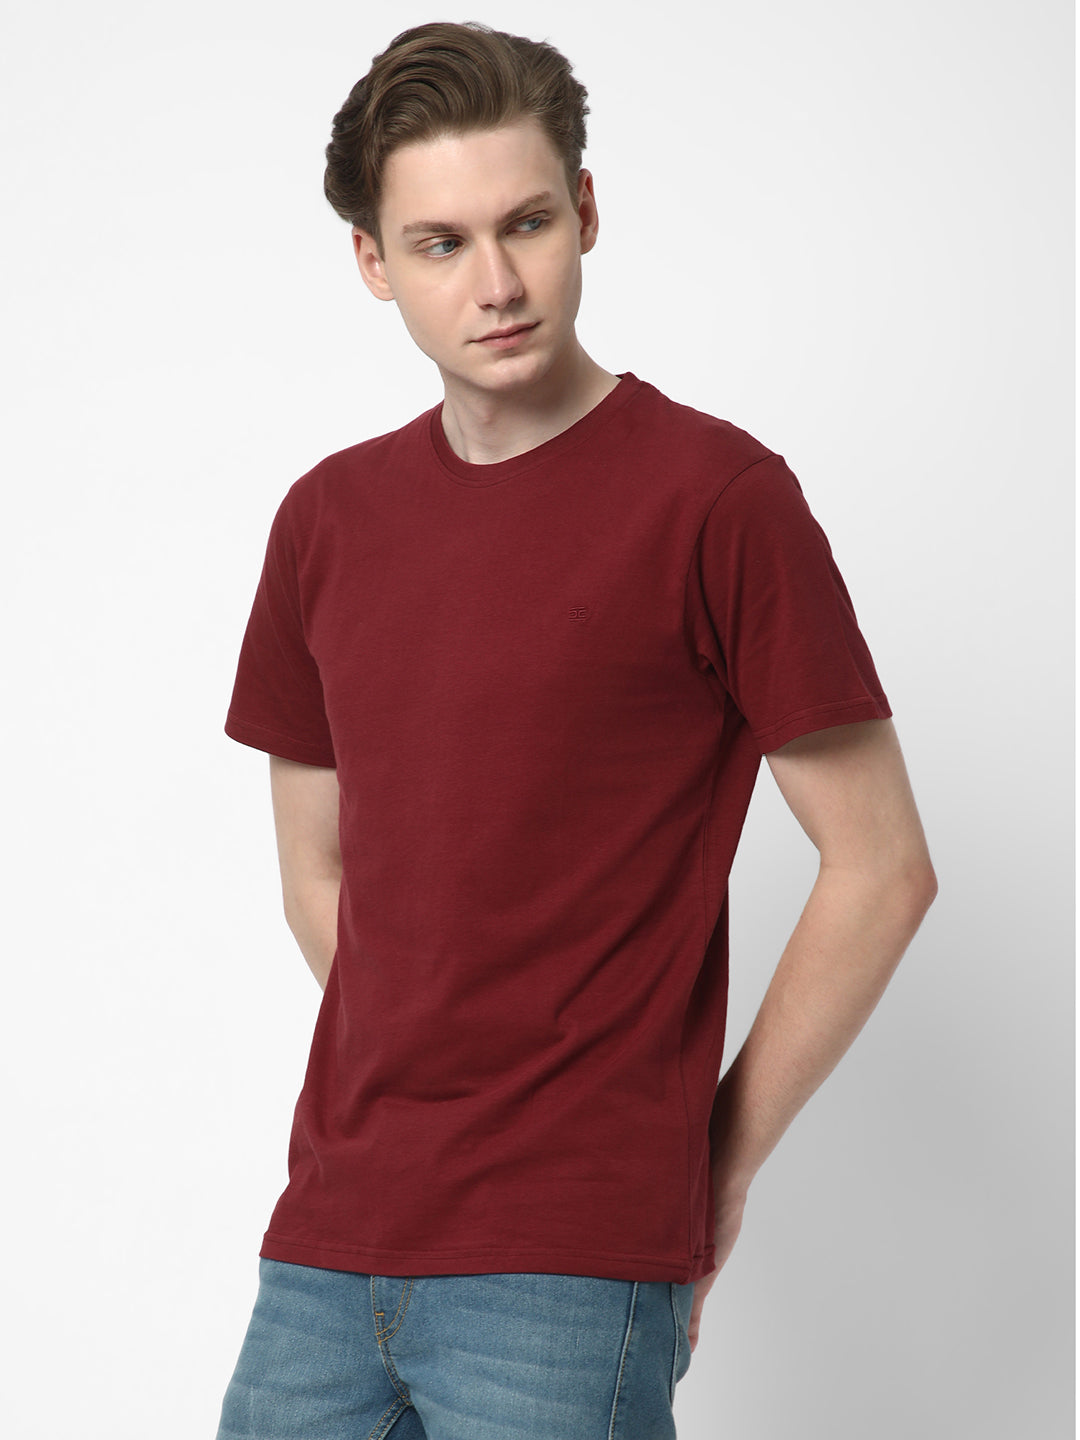 Cotstyle Cotton Fabrics Round Neck Short Length Plain Half Sleeve Casual & Daily Wear Men's T-Shirts -  Pack of 1 - Chocolate